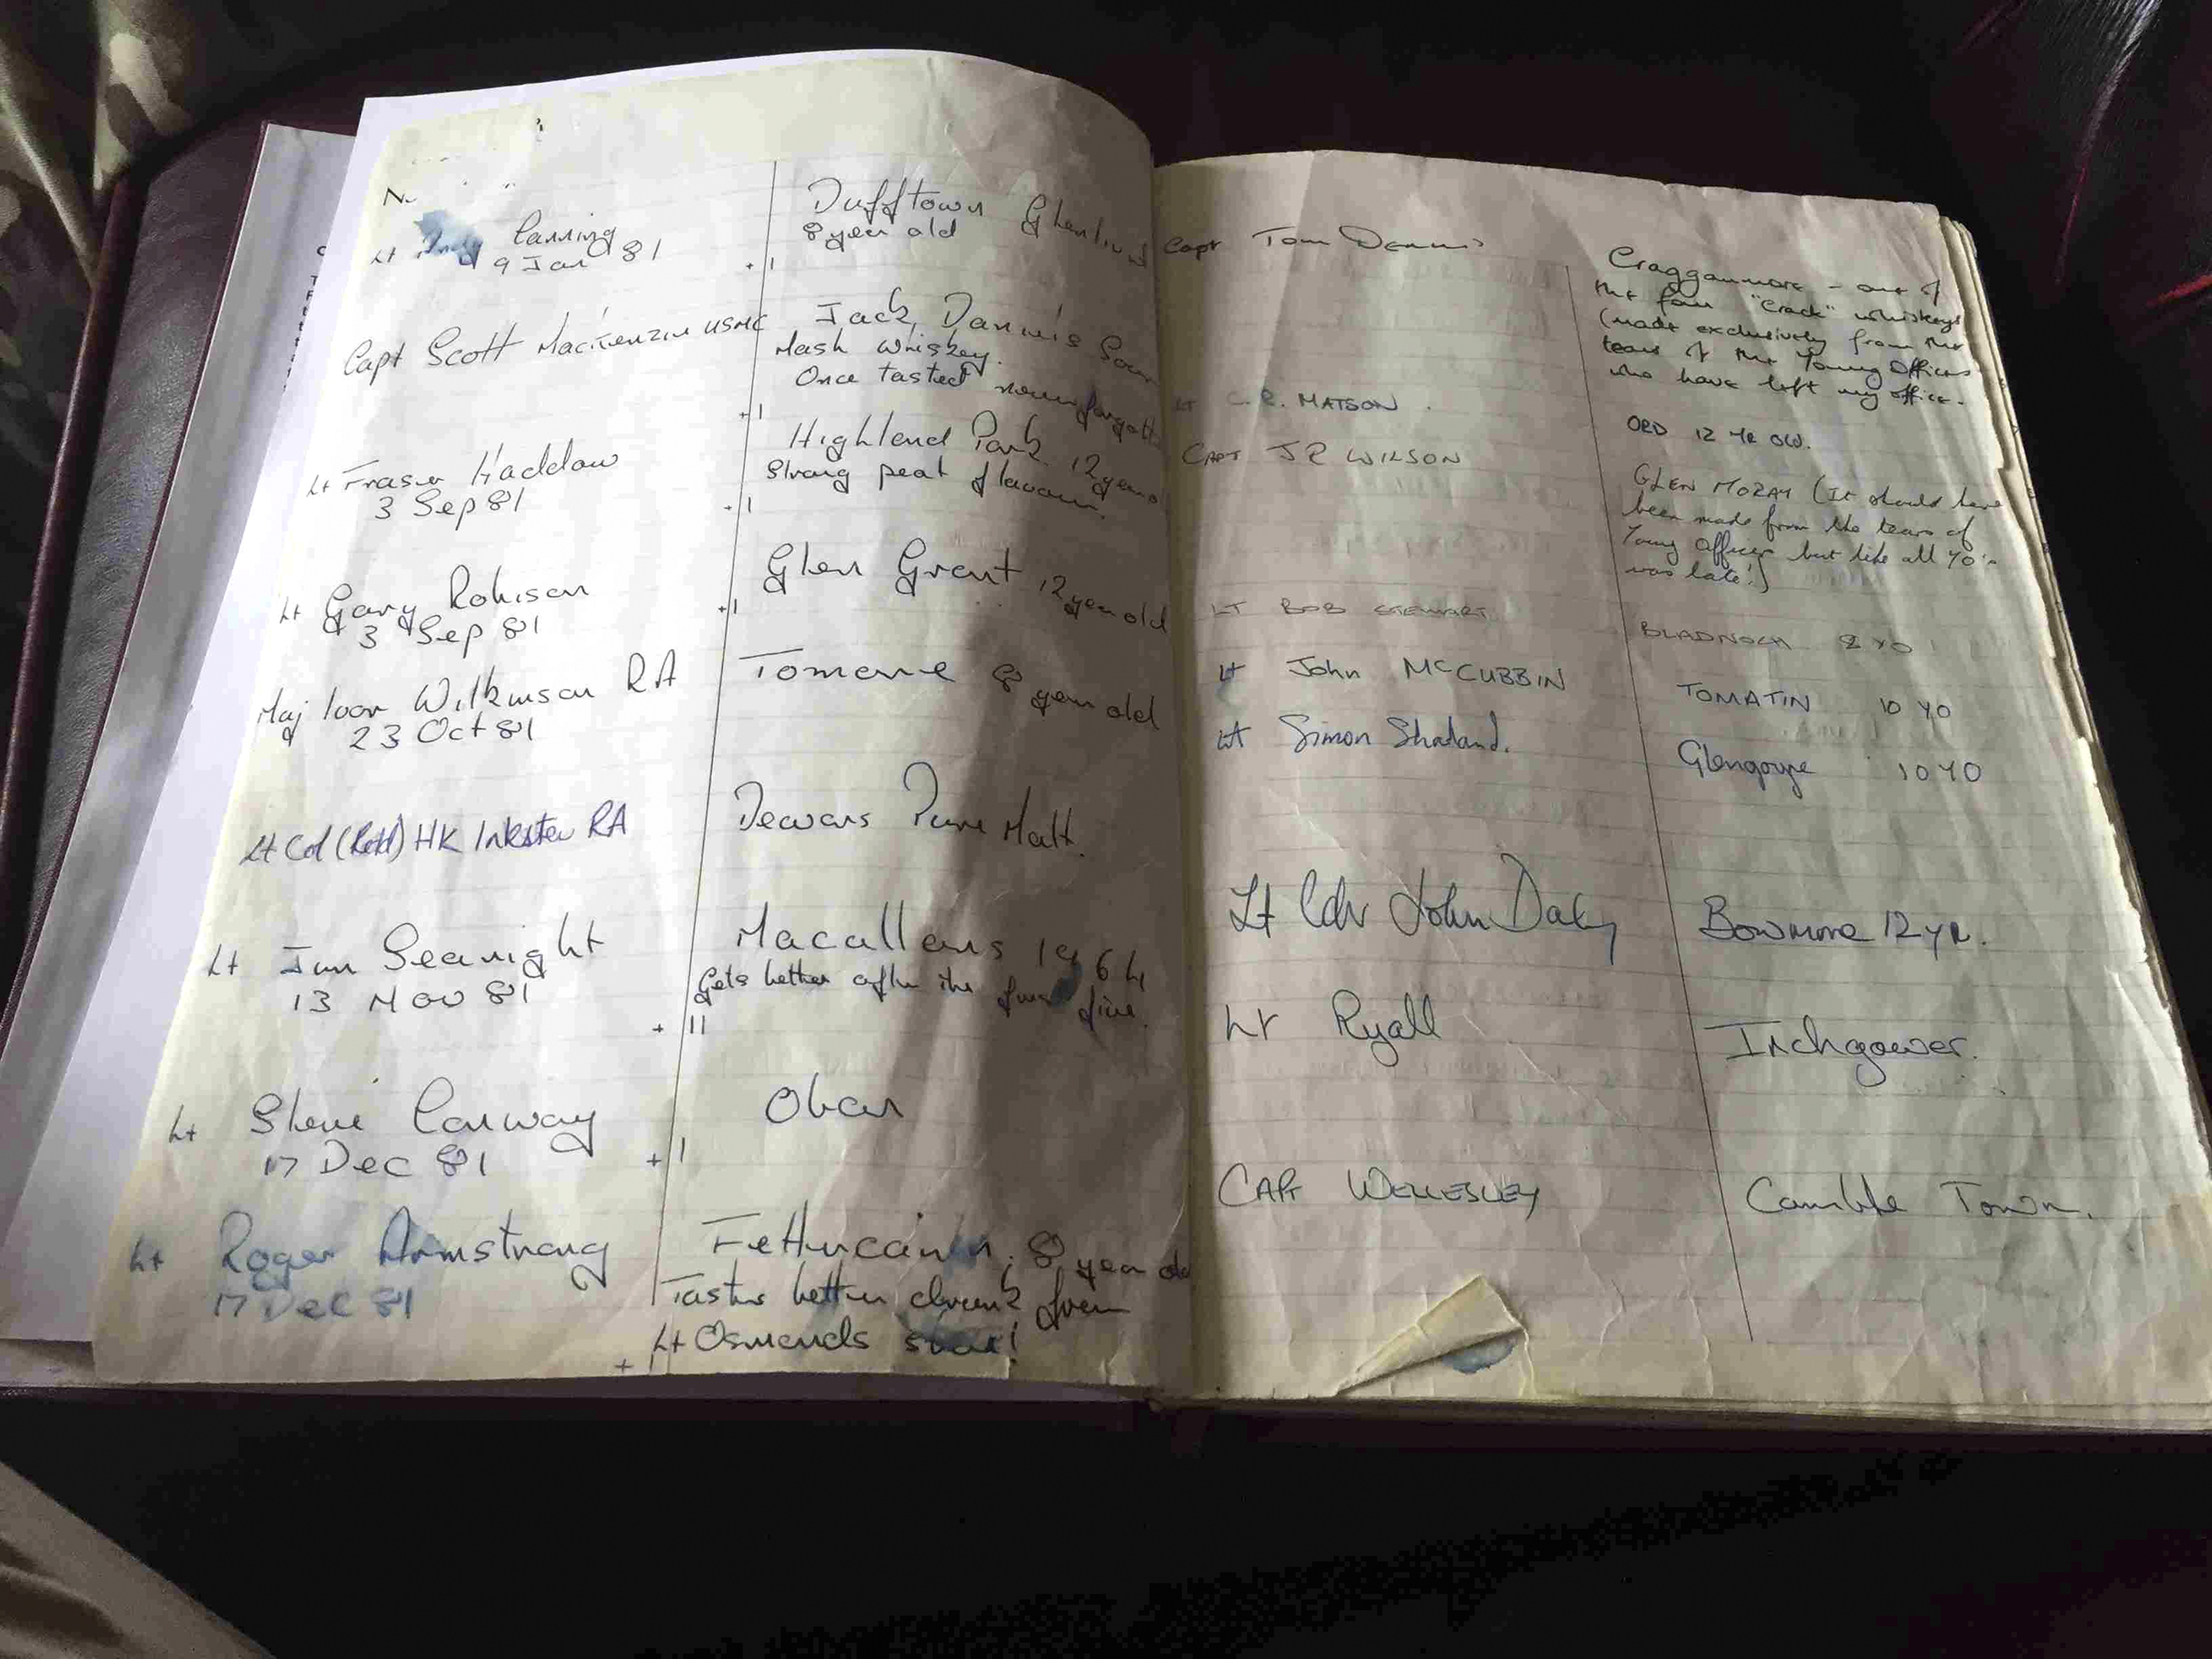 45 Commando's whisky book, listing all of the donations it has received from departing officers
